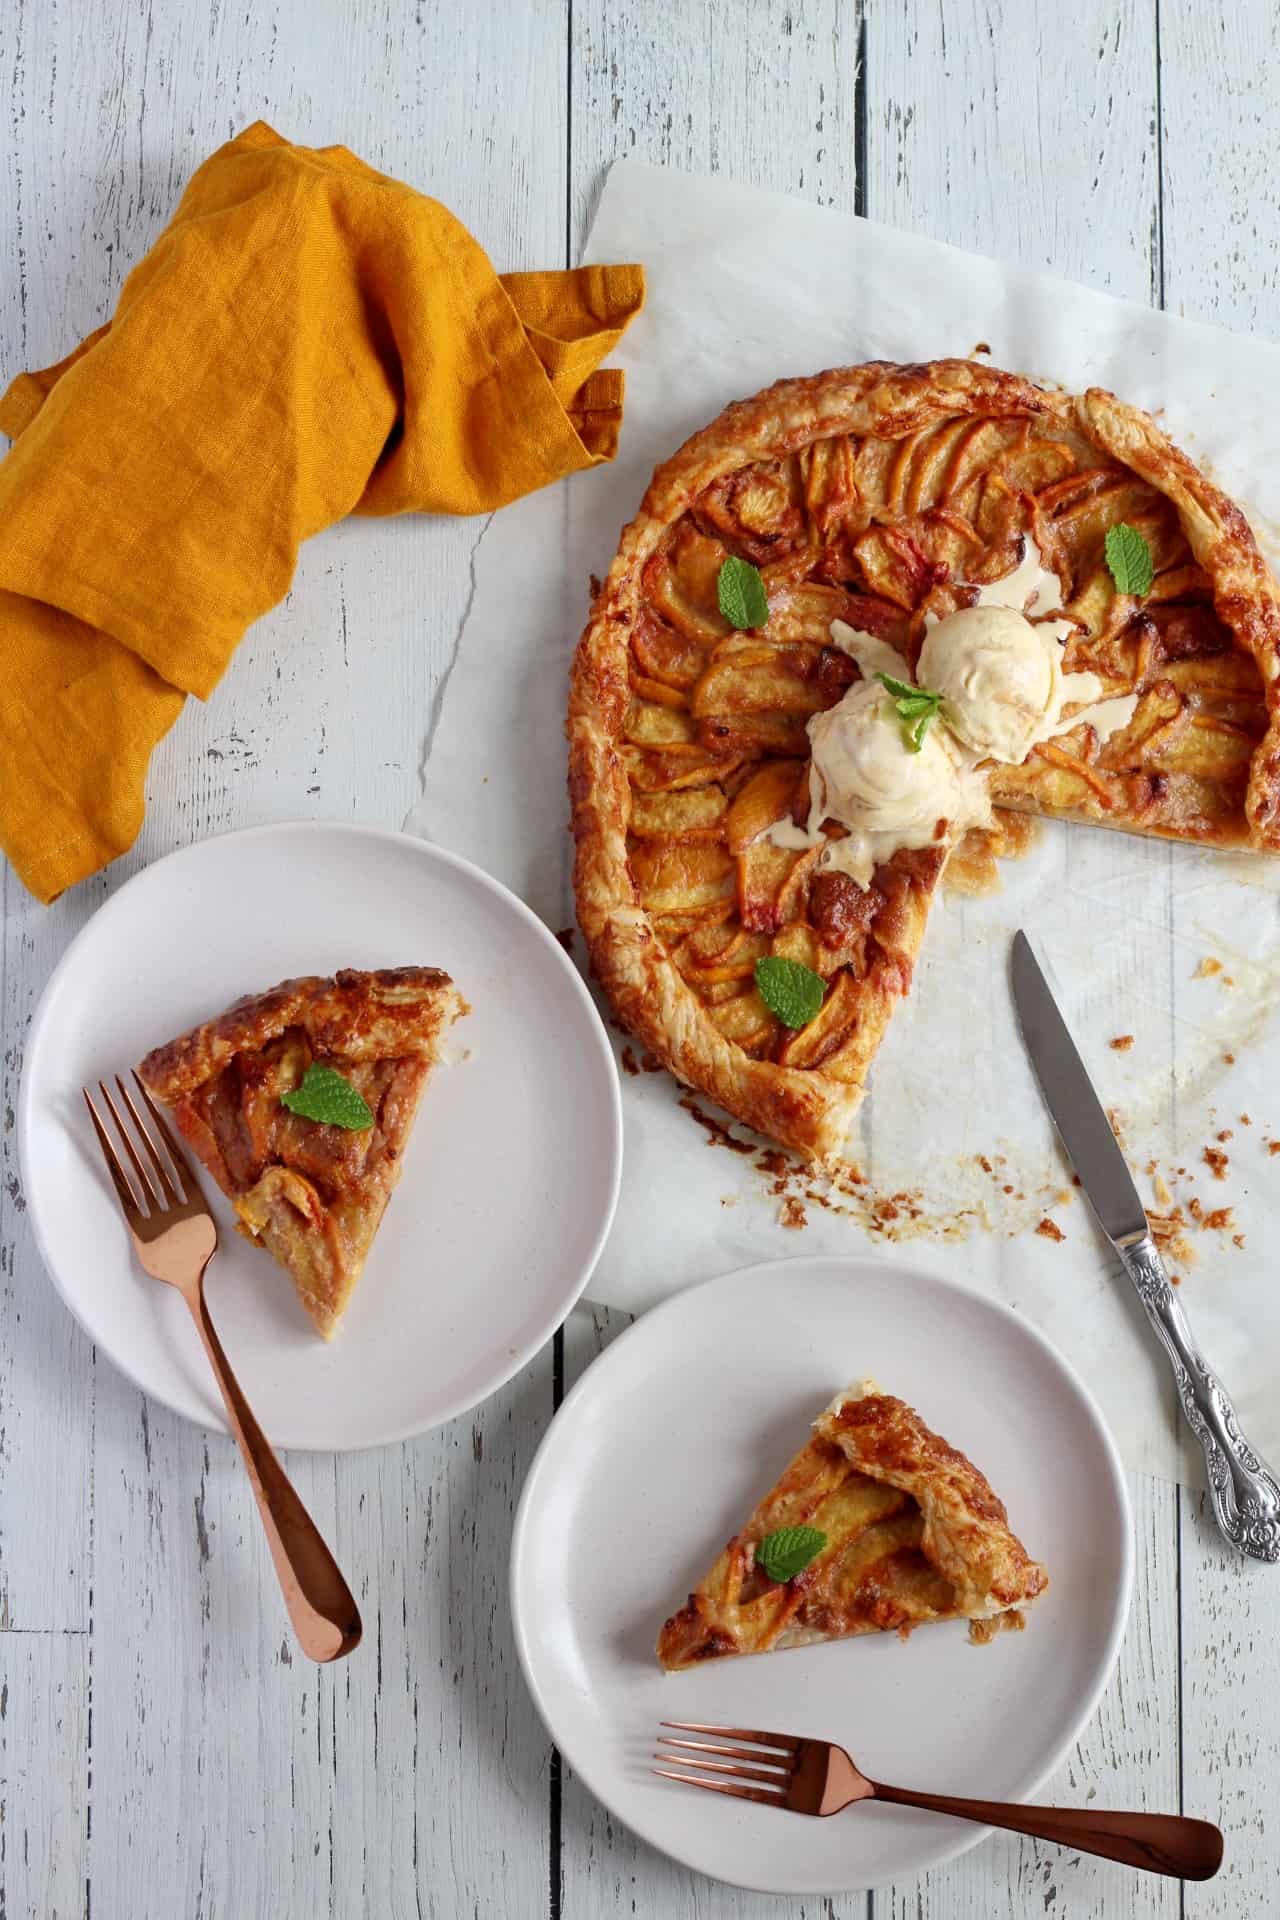 galette filled with peaches with two pieces cut out from the galette